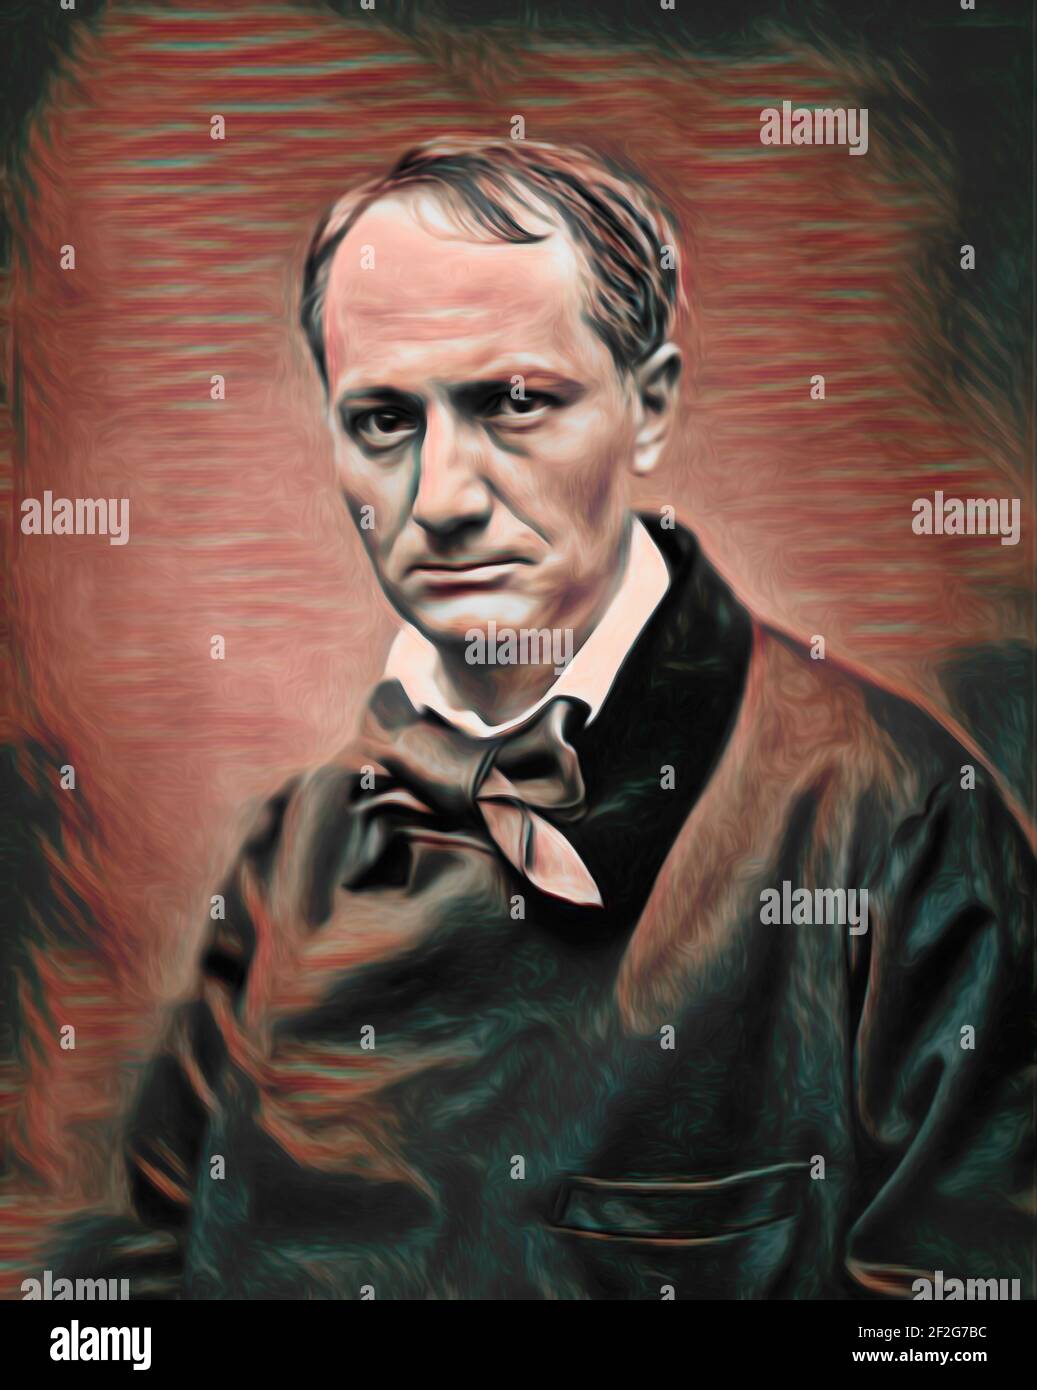 Charles Pierre Baudelaire, 1821 – 1867, French poet, portrait by Étienne Carjat, 1863, digitally altered Stock Photo